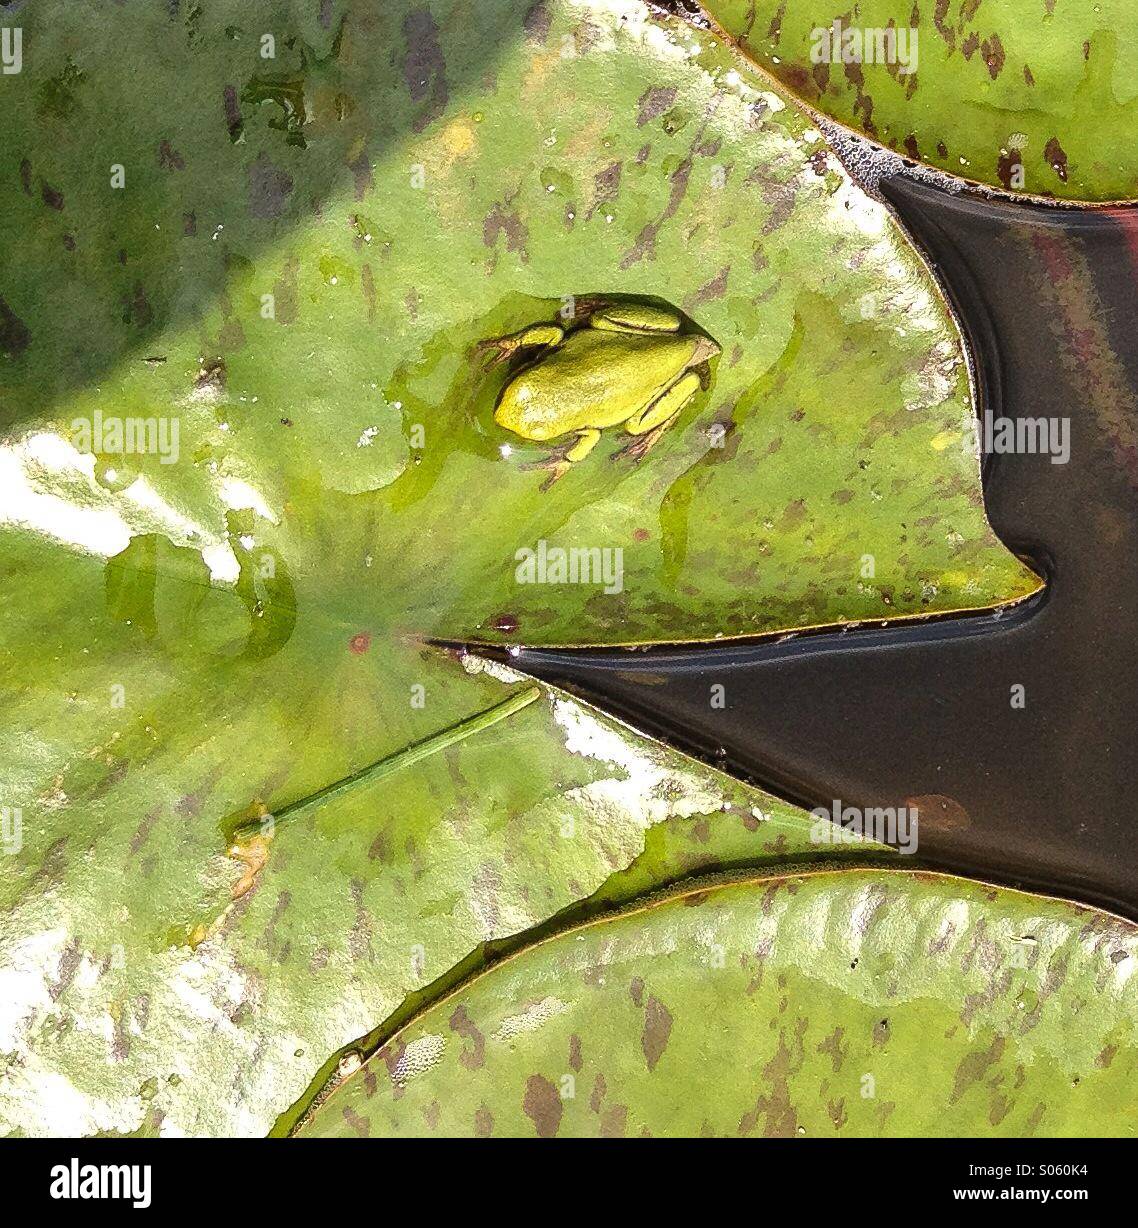 Green frog on a lily pad Stock Photo